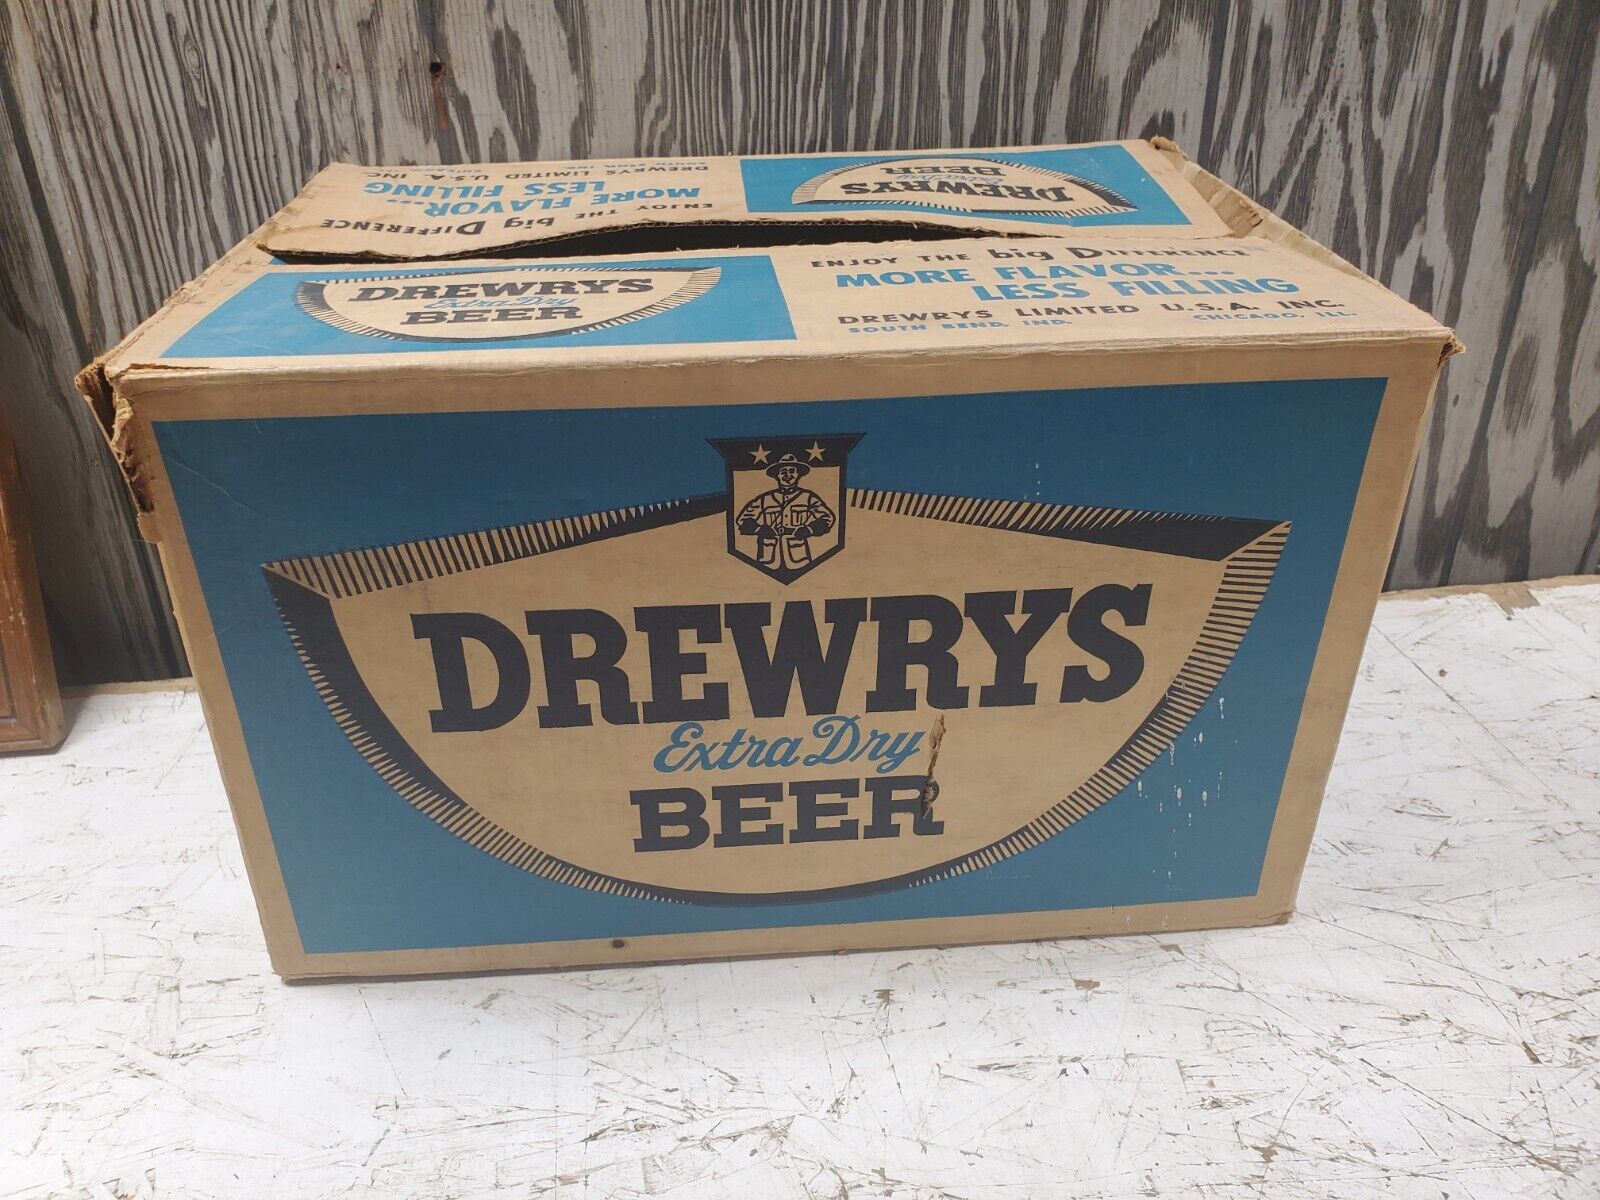 Vintage 1959 Drewrys Extra Dry Beer Box 48 12oz Cans 16.5x11.5x10 (b52)